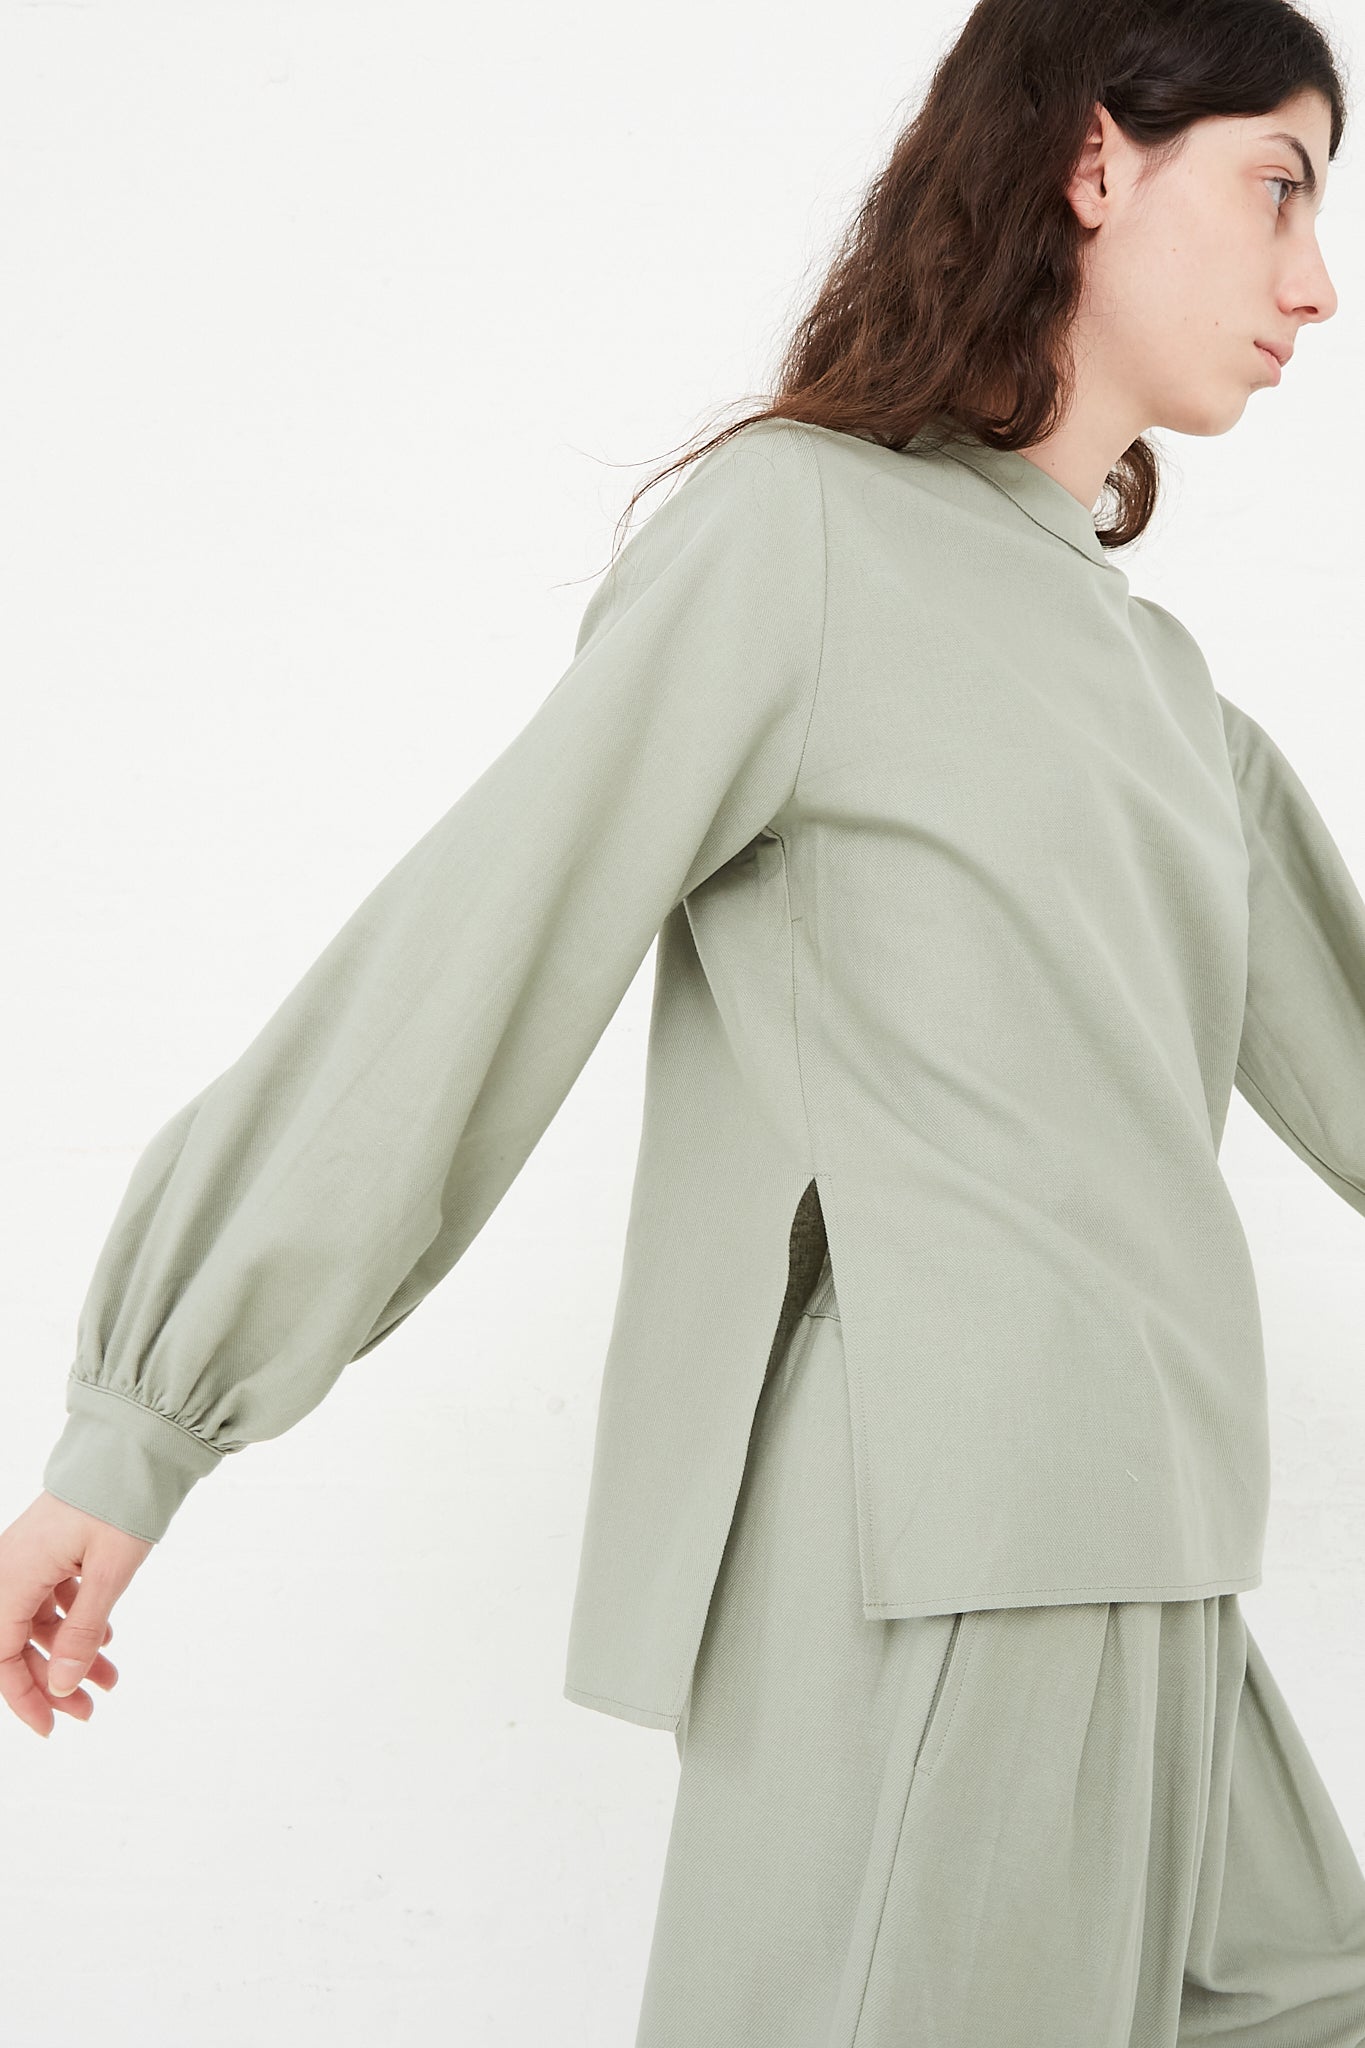 Cotton Twill Puff Sleeve Blouse in Agave by Black Crane for Oroboro Side